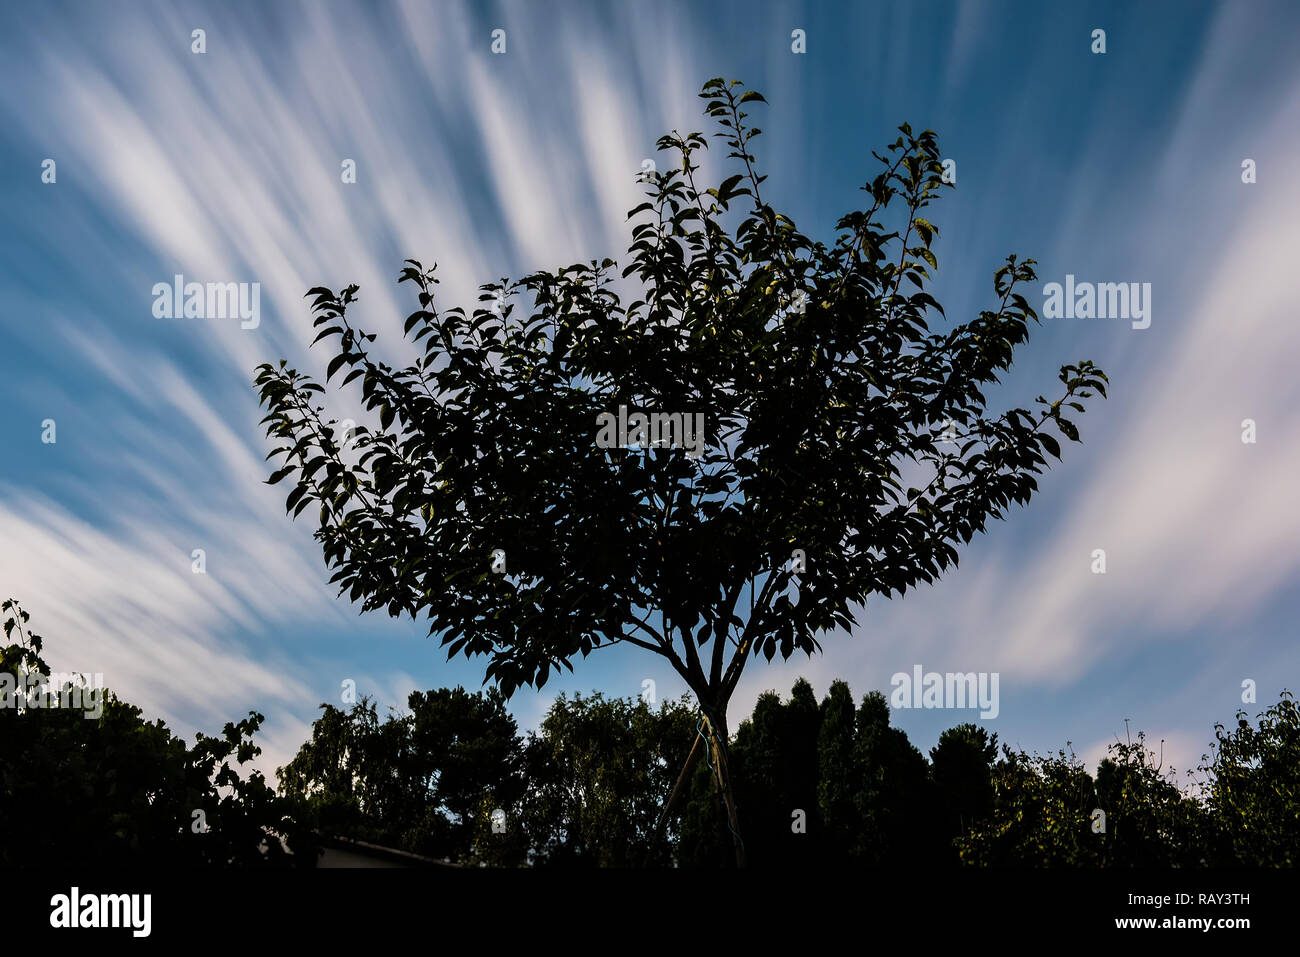 long exposure image of tree with cloud stripes at moonlight Stock Photo